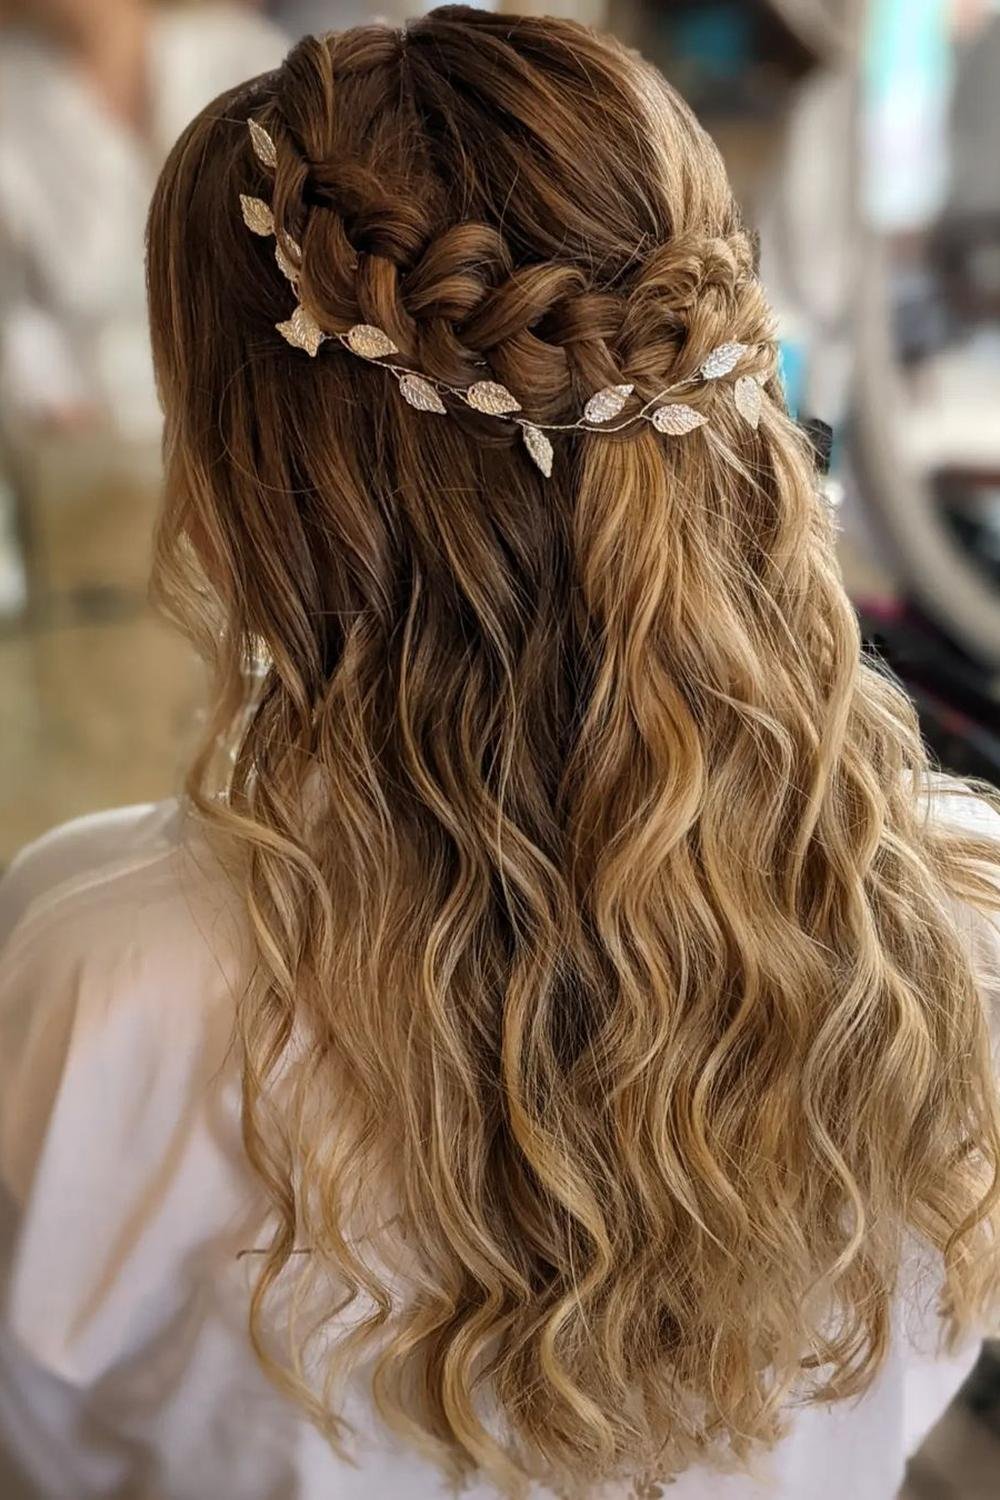 24 - Picture of Braided Hairstyles